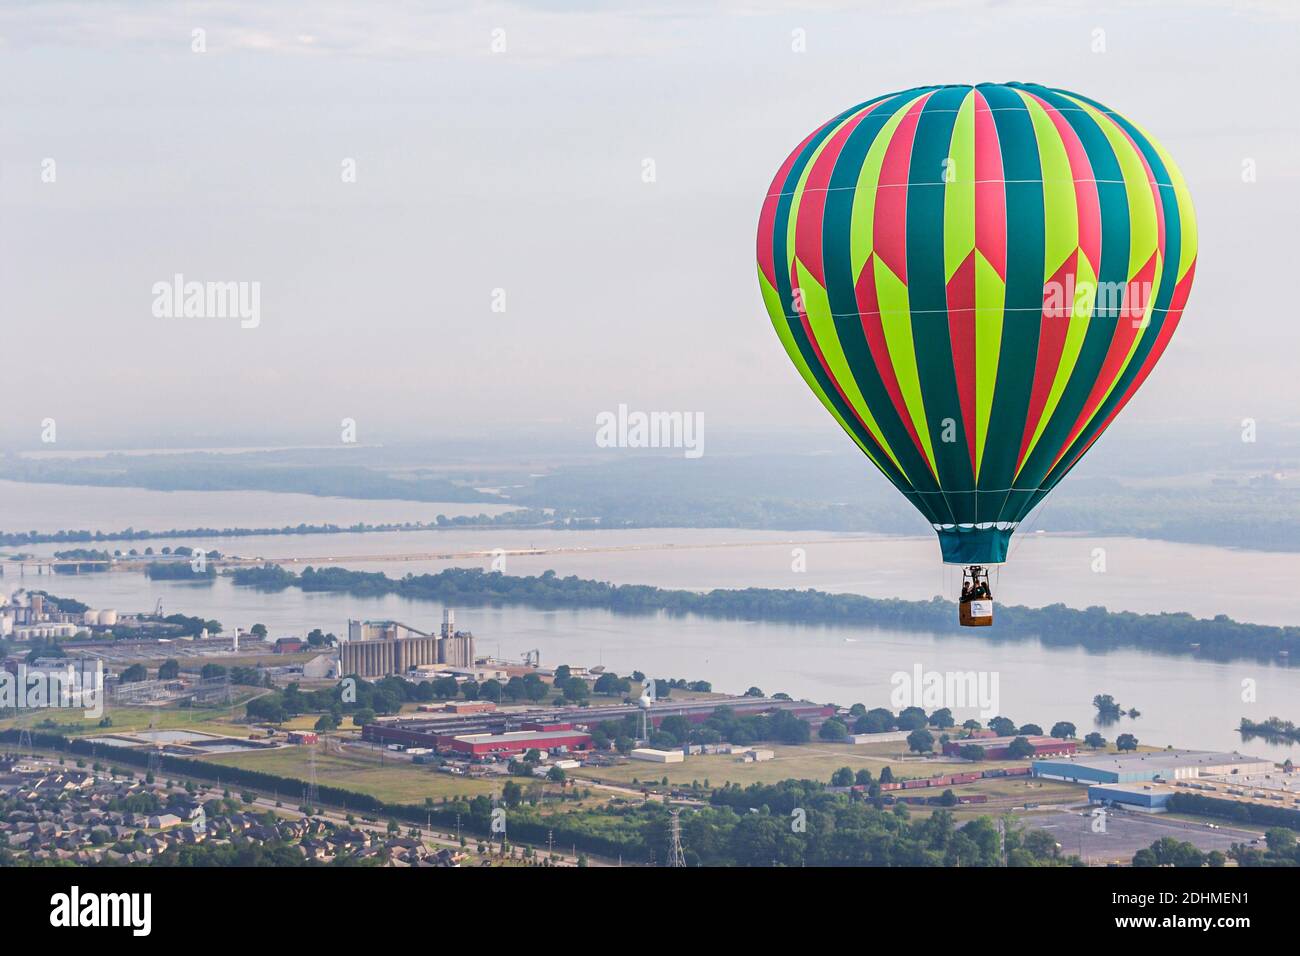 Alabama Decatur Alabama Jubilee Hot Air Balloon Classic,Point Mallard Park balloons annual view from gondola aerial Tennessee River, Stock Photo